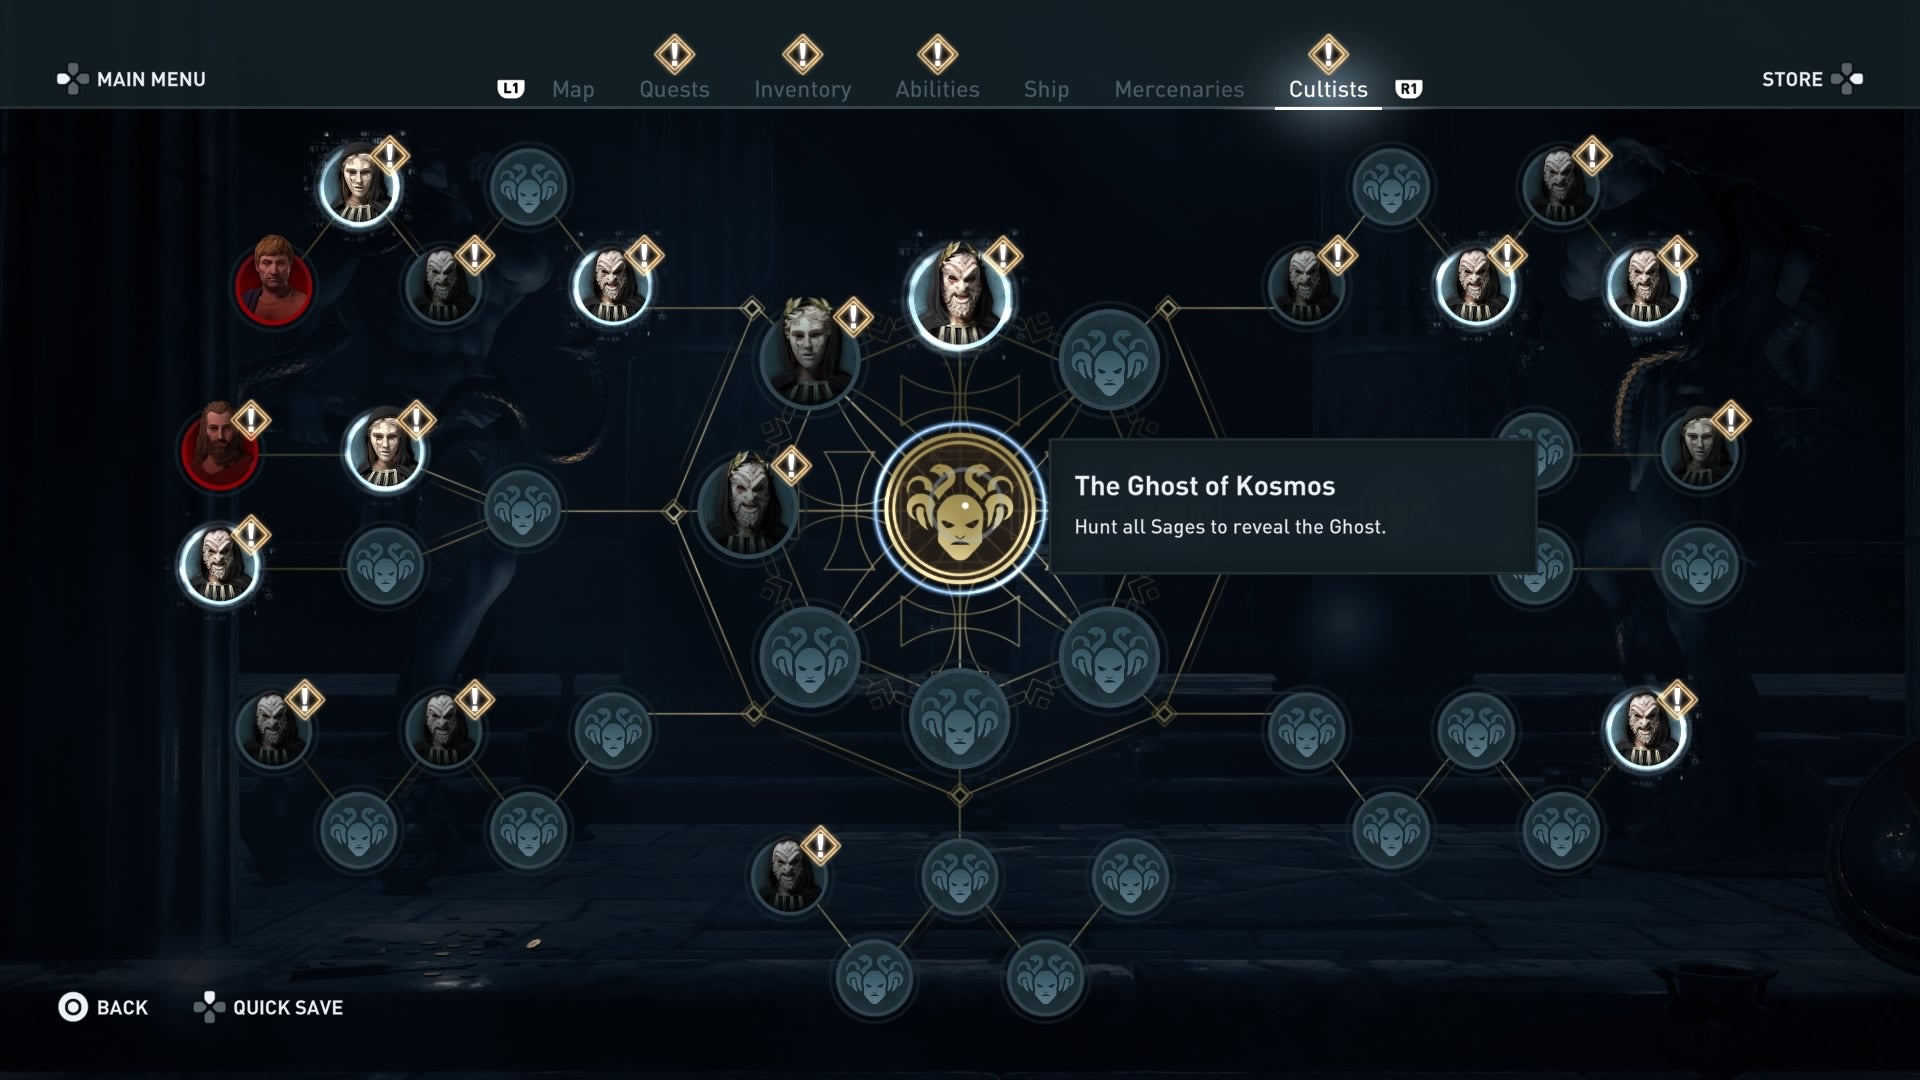 Image for Assassin's Creed Odyssey Cultists Guide: How and where to find more Cultists